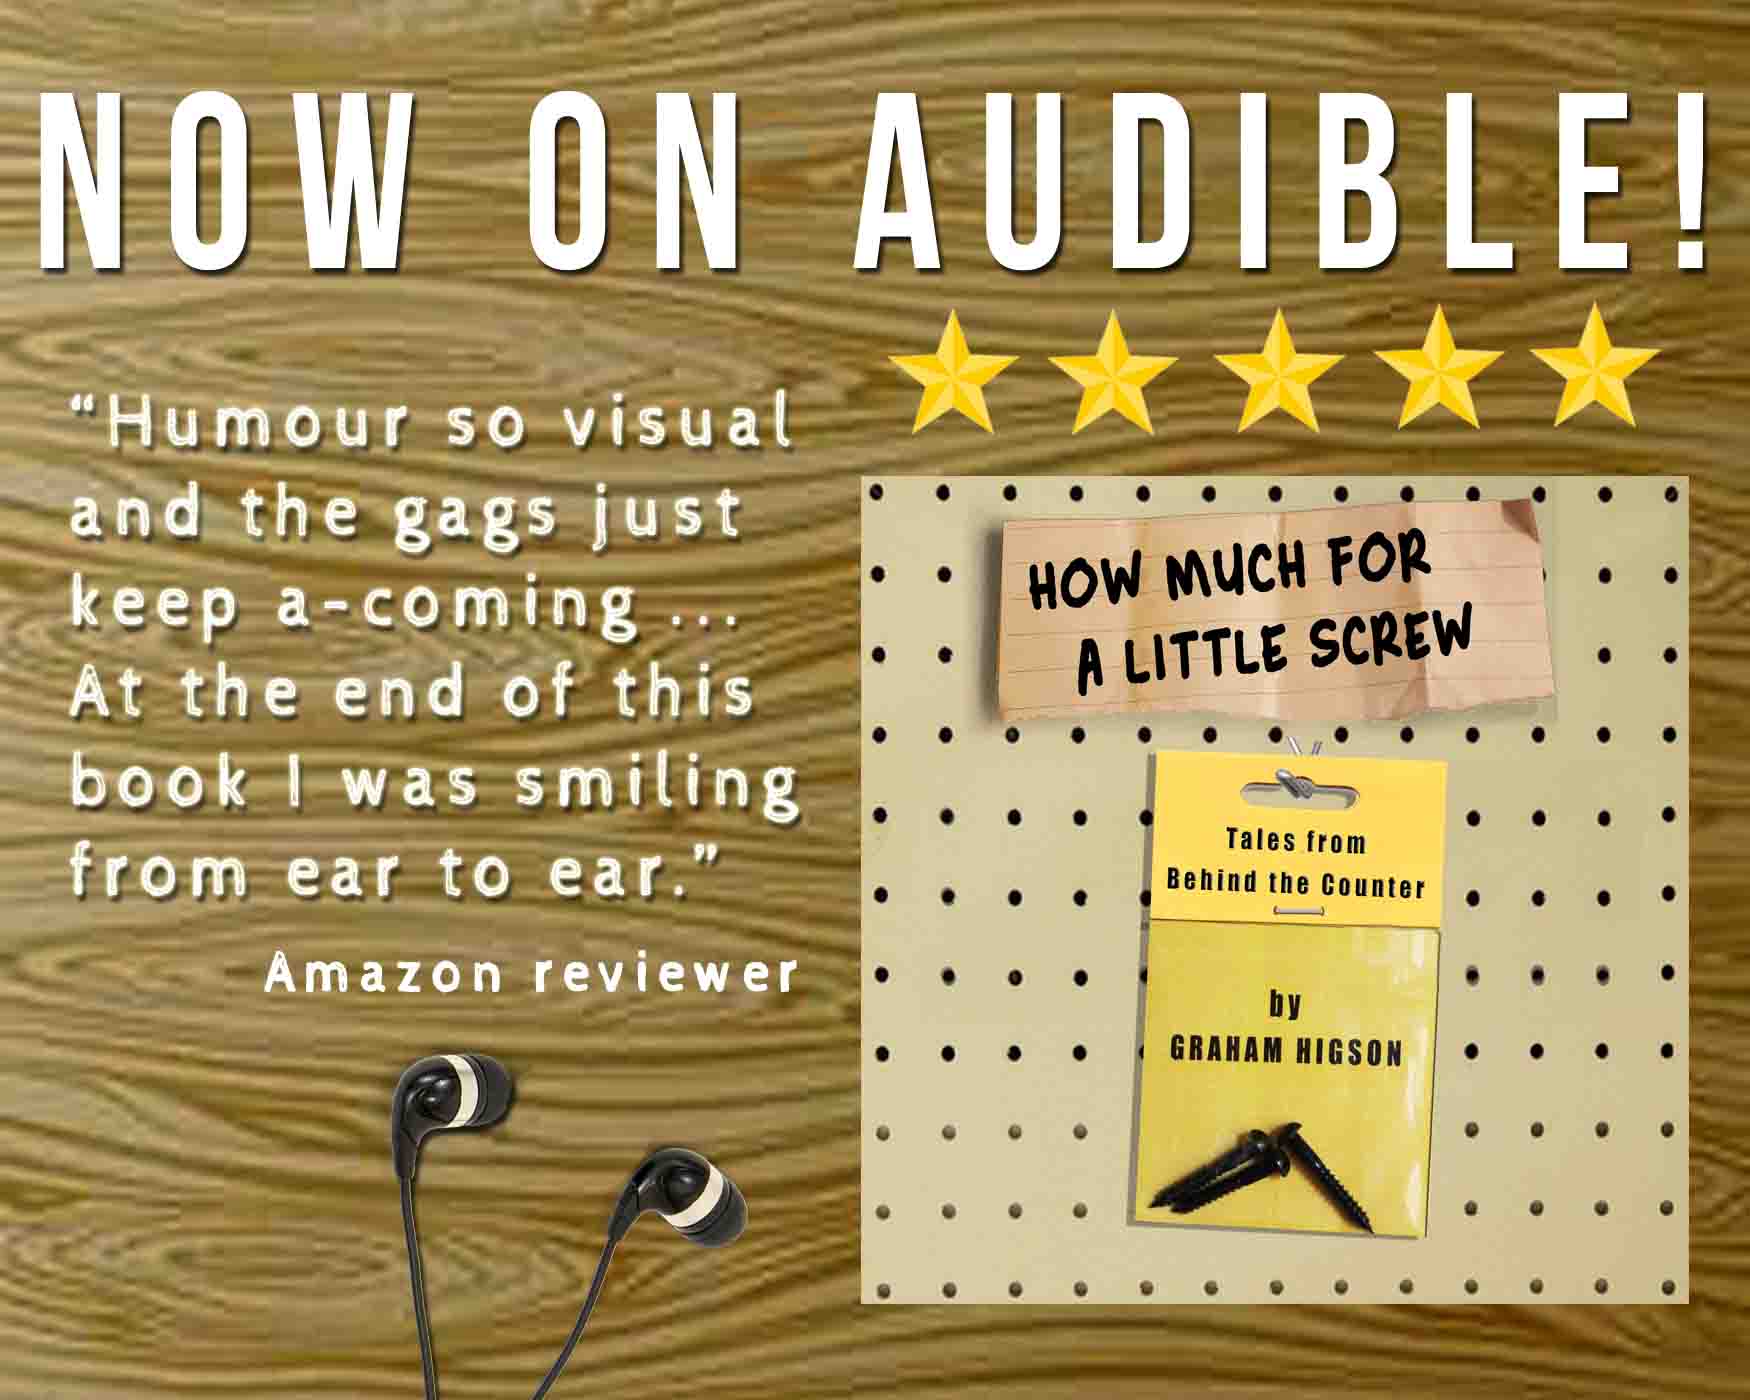 Banner link to Audible page